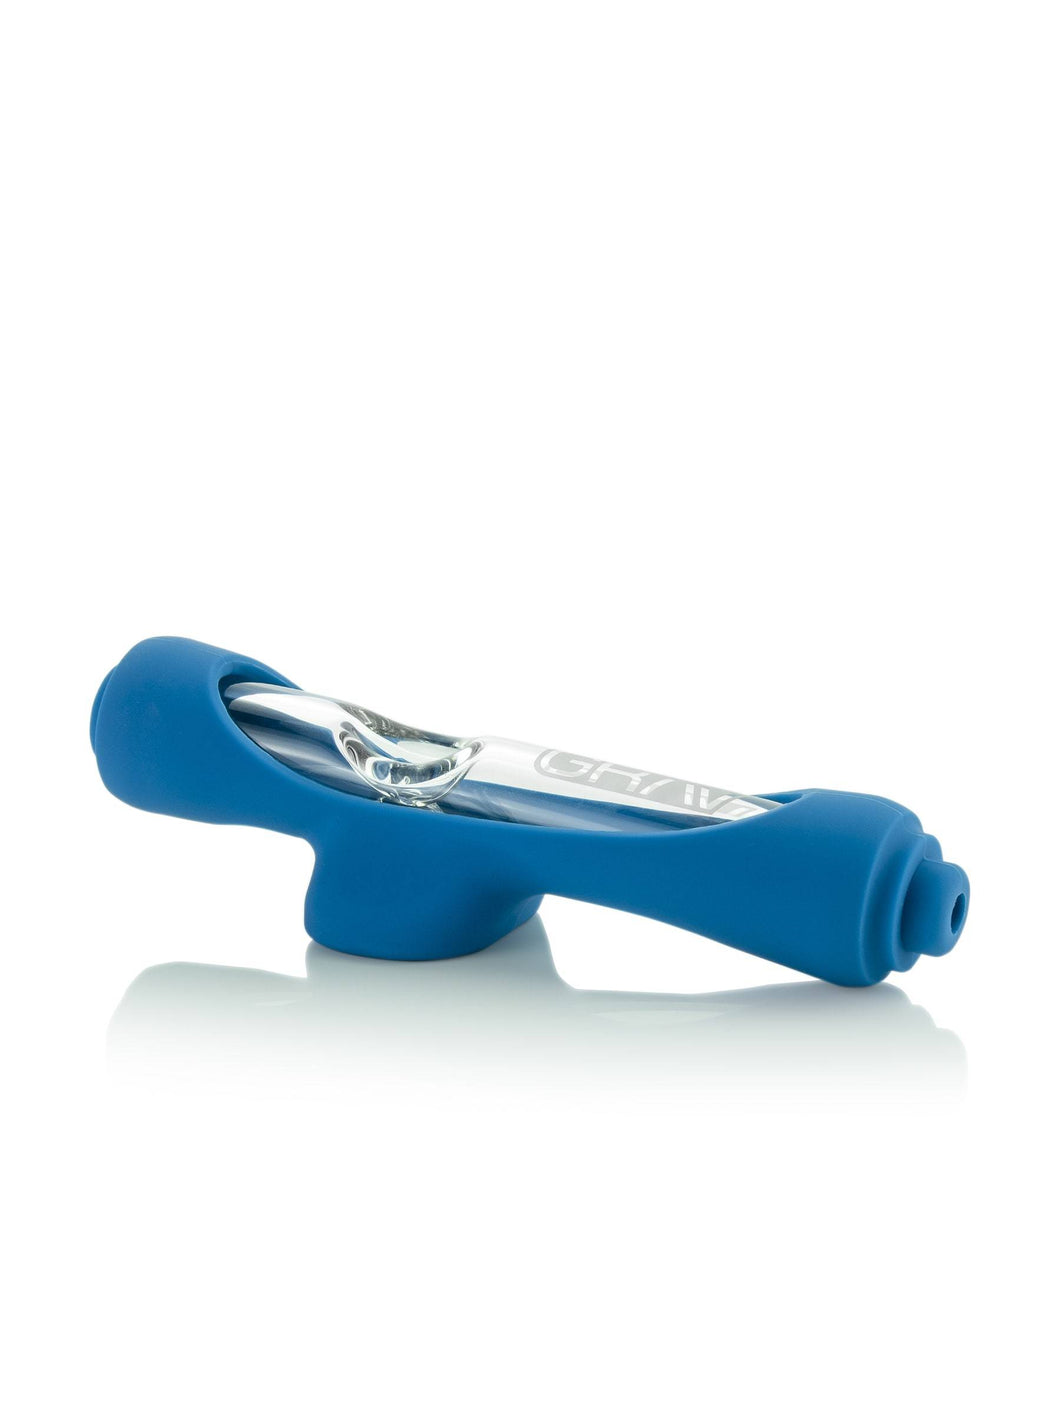 Grav - Mini Steamroller with Silicone Skin - Blue